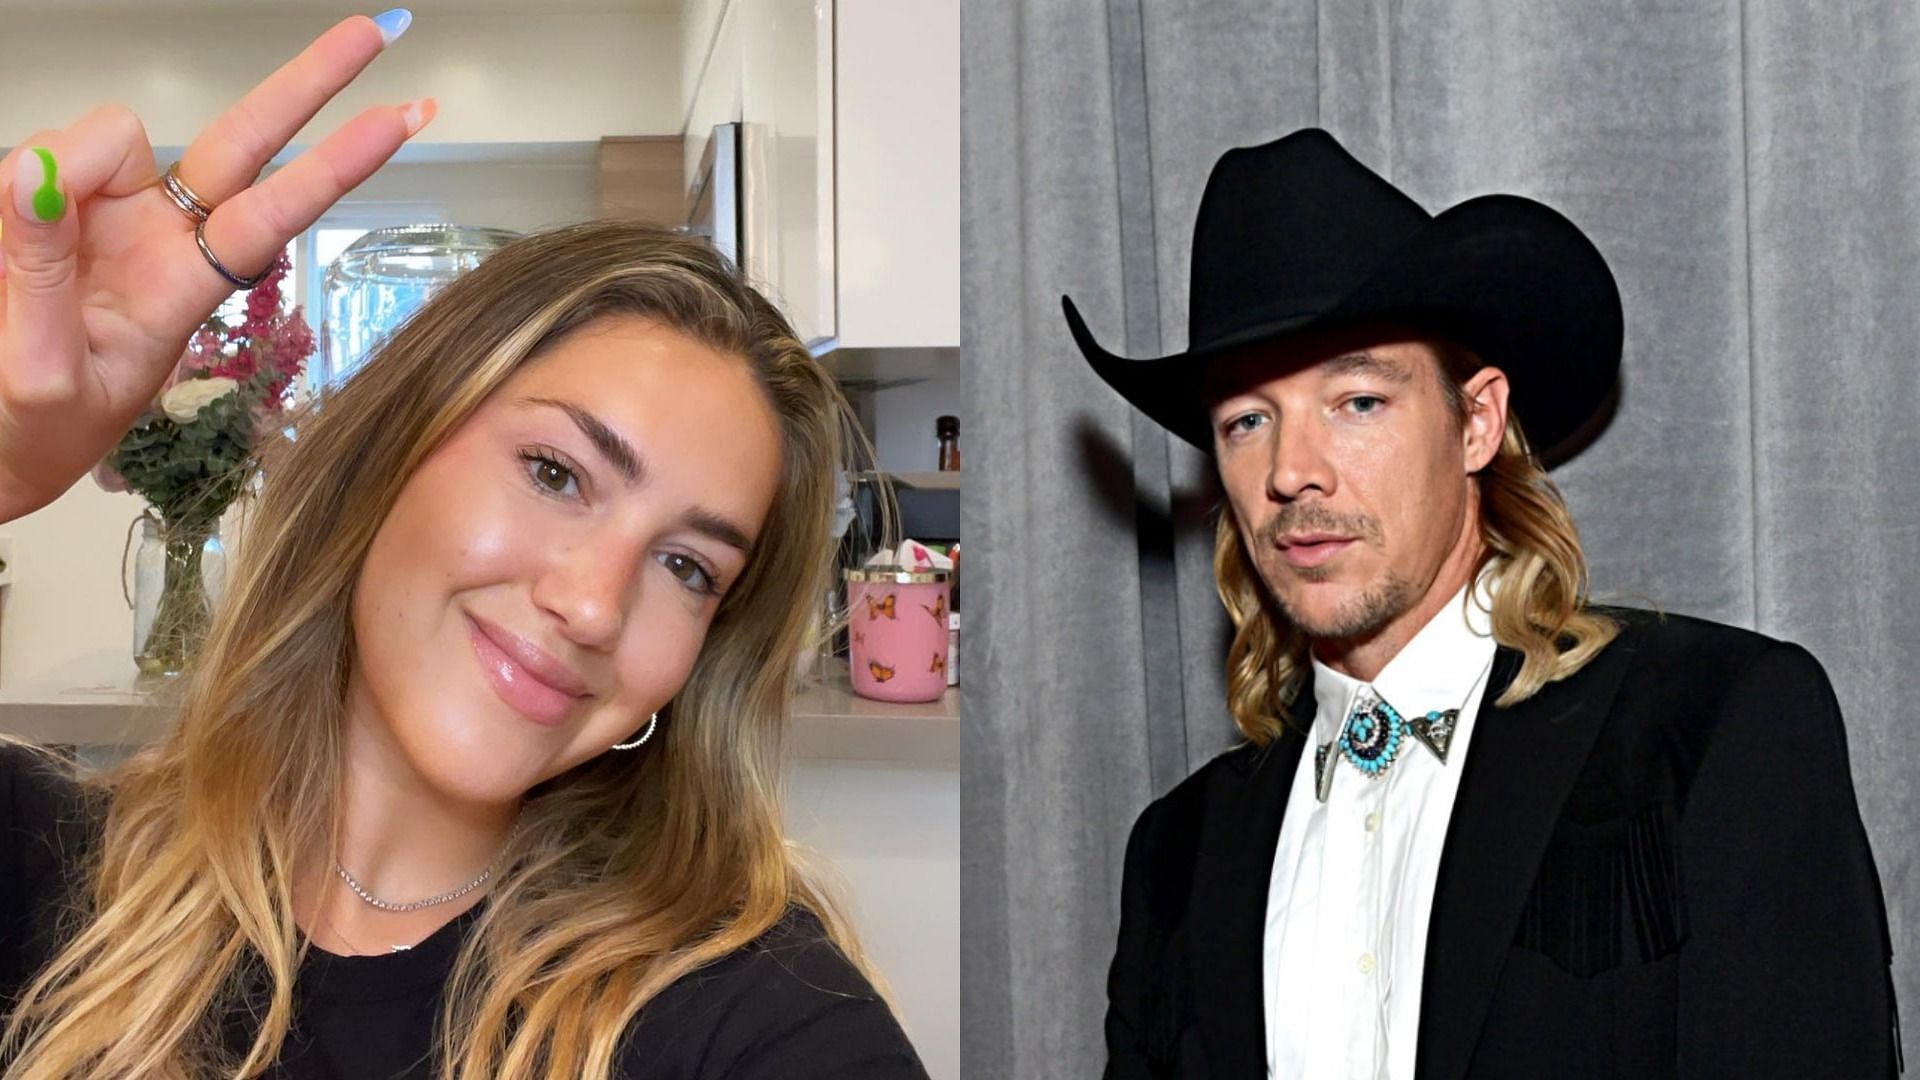 TikToker Tinx and DJ Diplo sparked romance rumors once again (Image via Tinx/Instagram and Emma McIntyre/Getty Images)